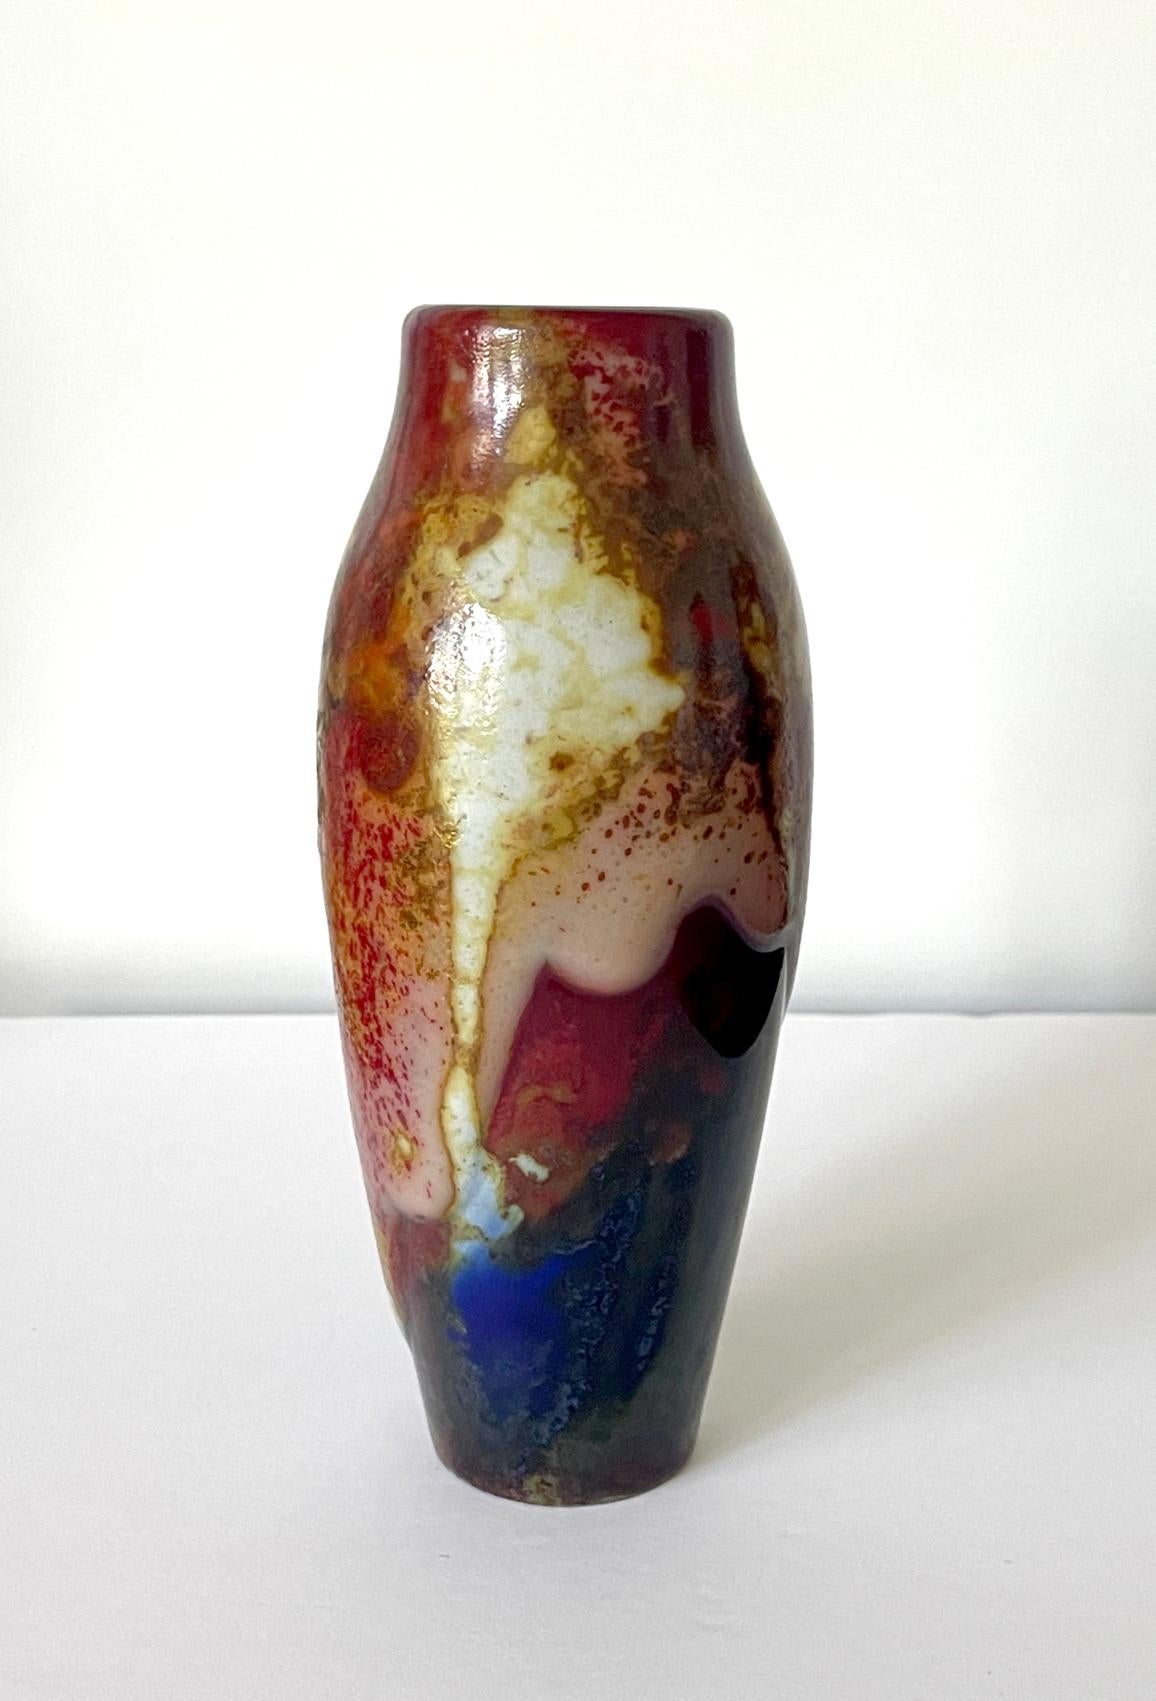 A glazed ceramic vase in slender spindle form from the Chang Ware series by Royal Doulton (England, founded 1815) circa 1920-30s. The vase was decorated with thick and dripping glaze in rich mottled polychrome colors. The glaze shows overall